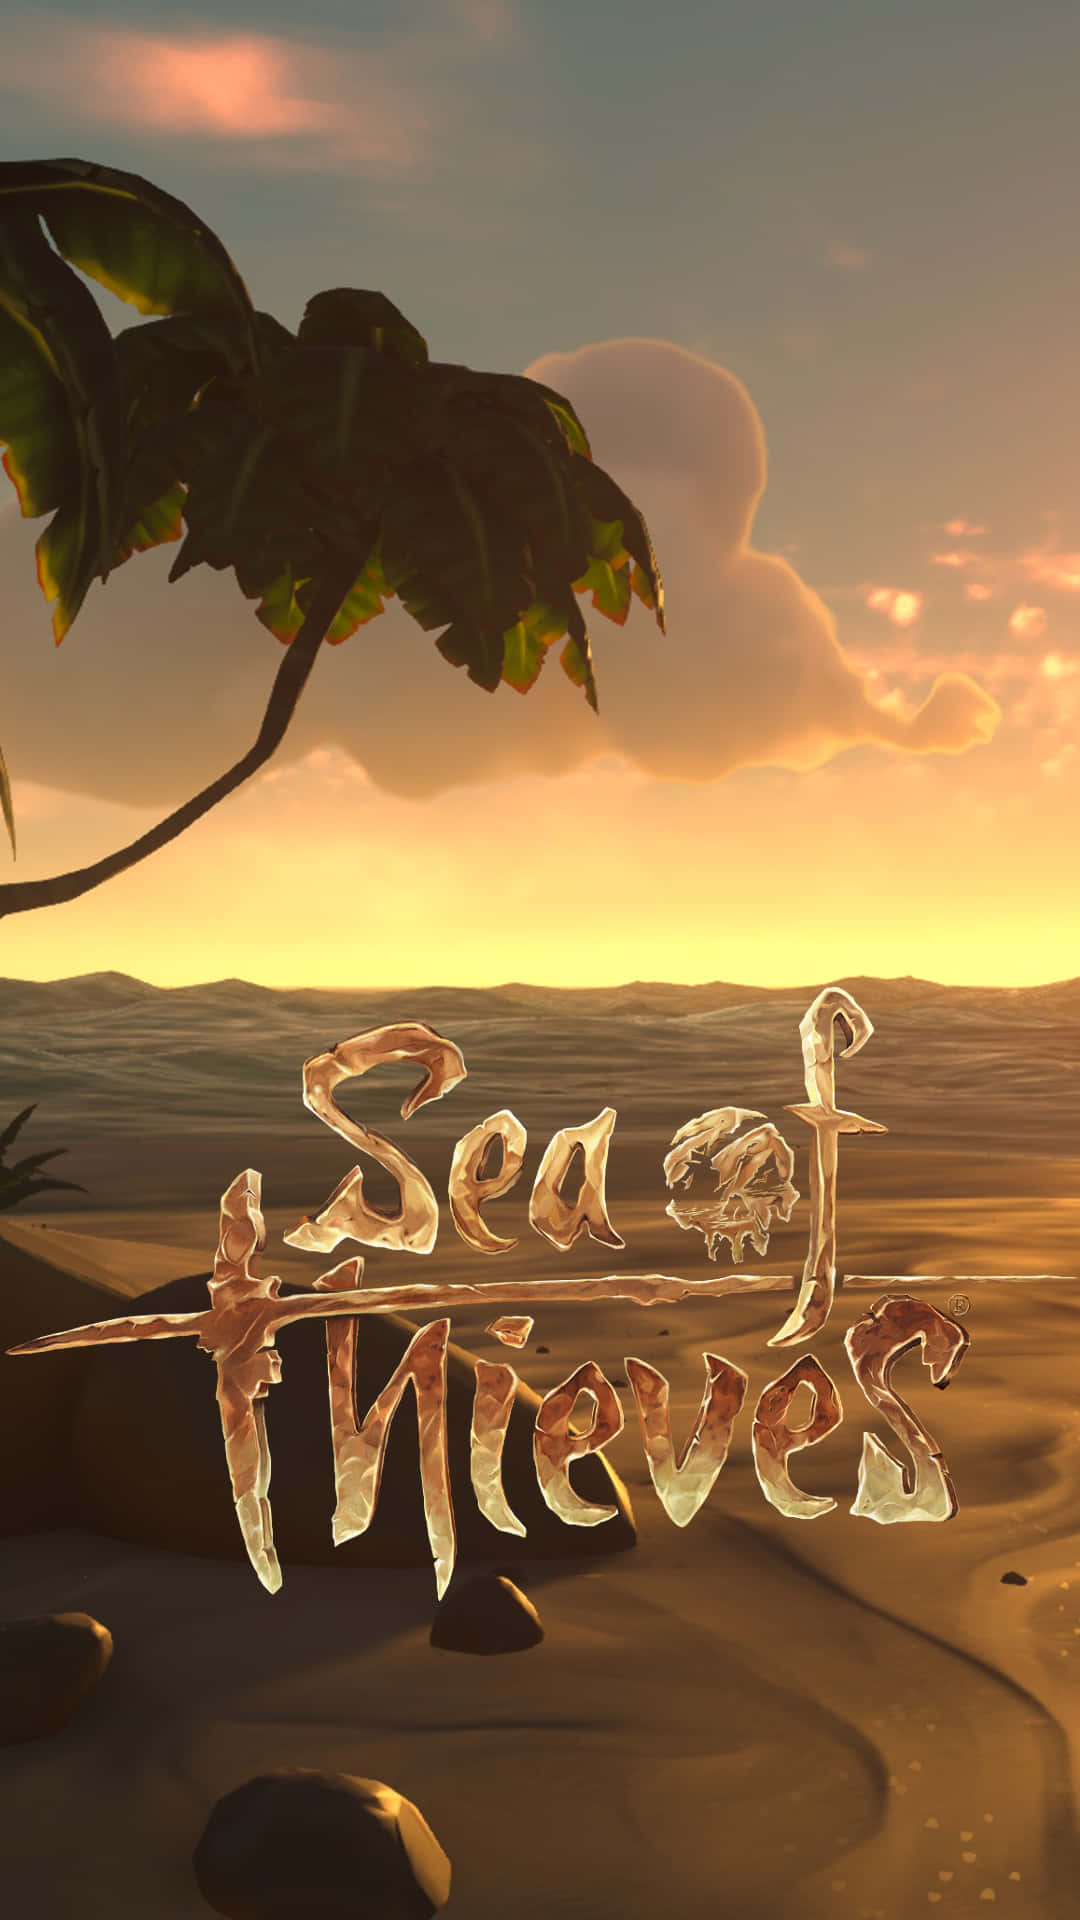 Embark on your next high seas adventure with Sea of Thieves Phone Wallpaper